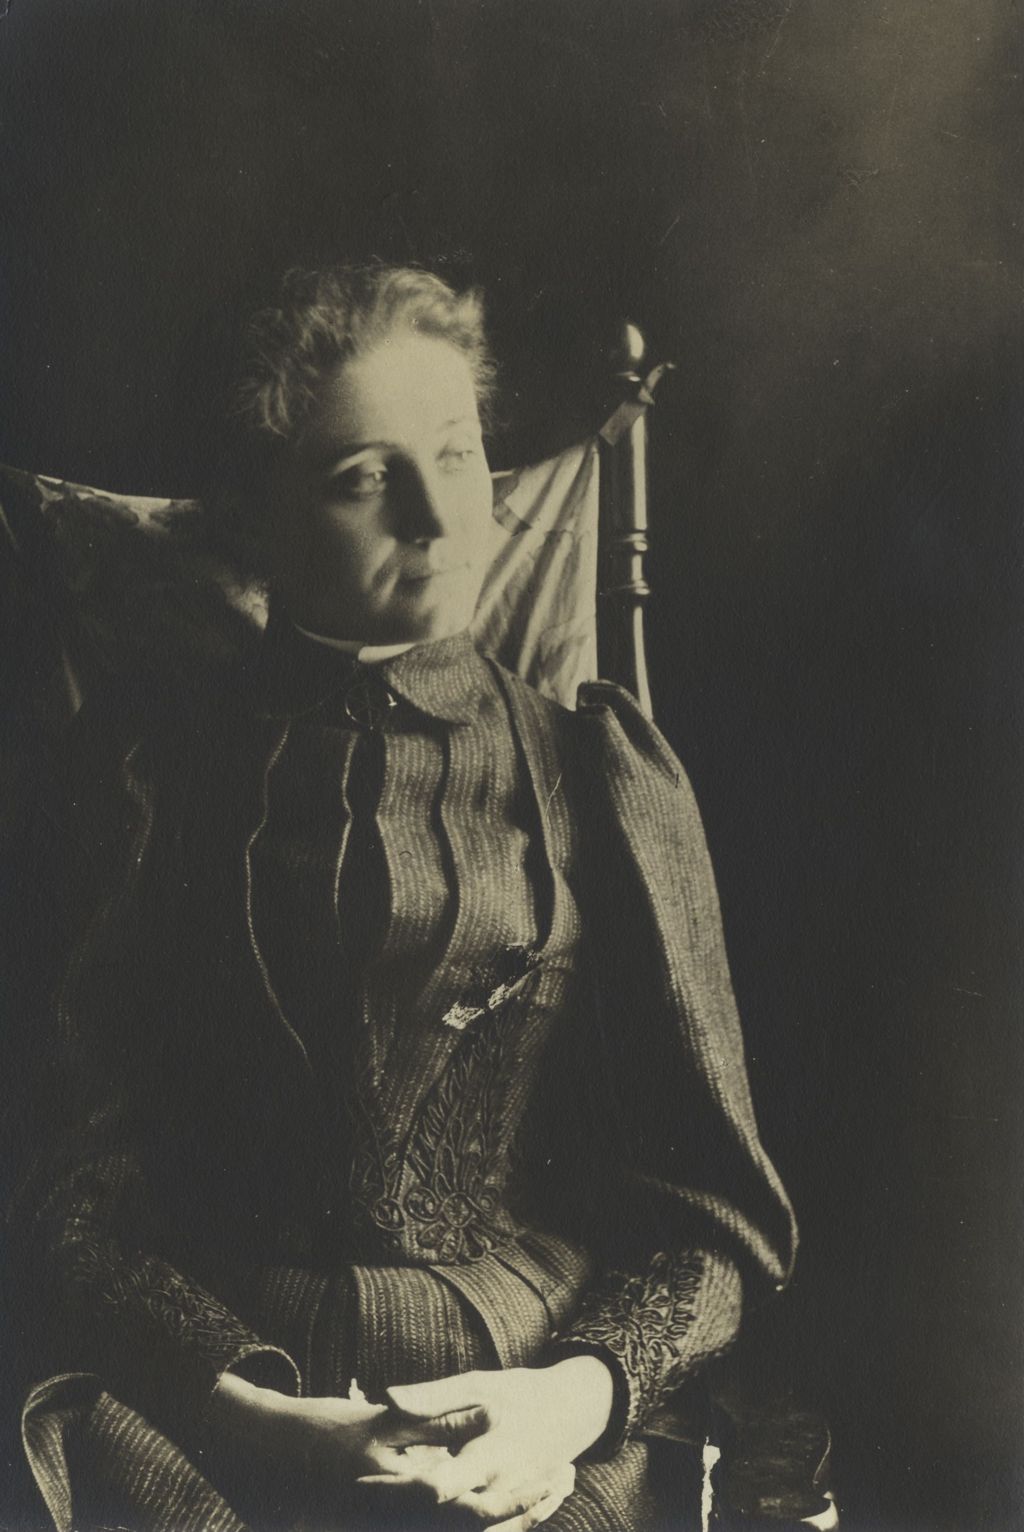 Portrait of Jane Addams seated in a rocking chair